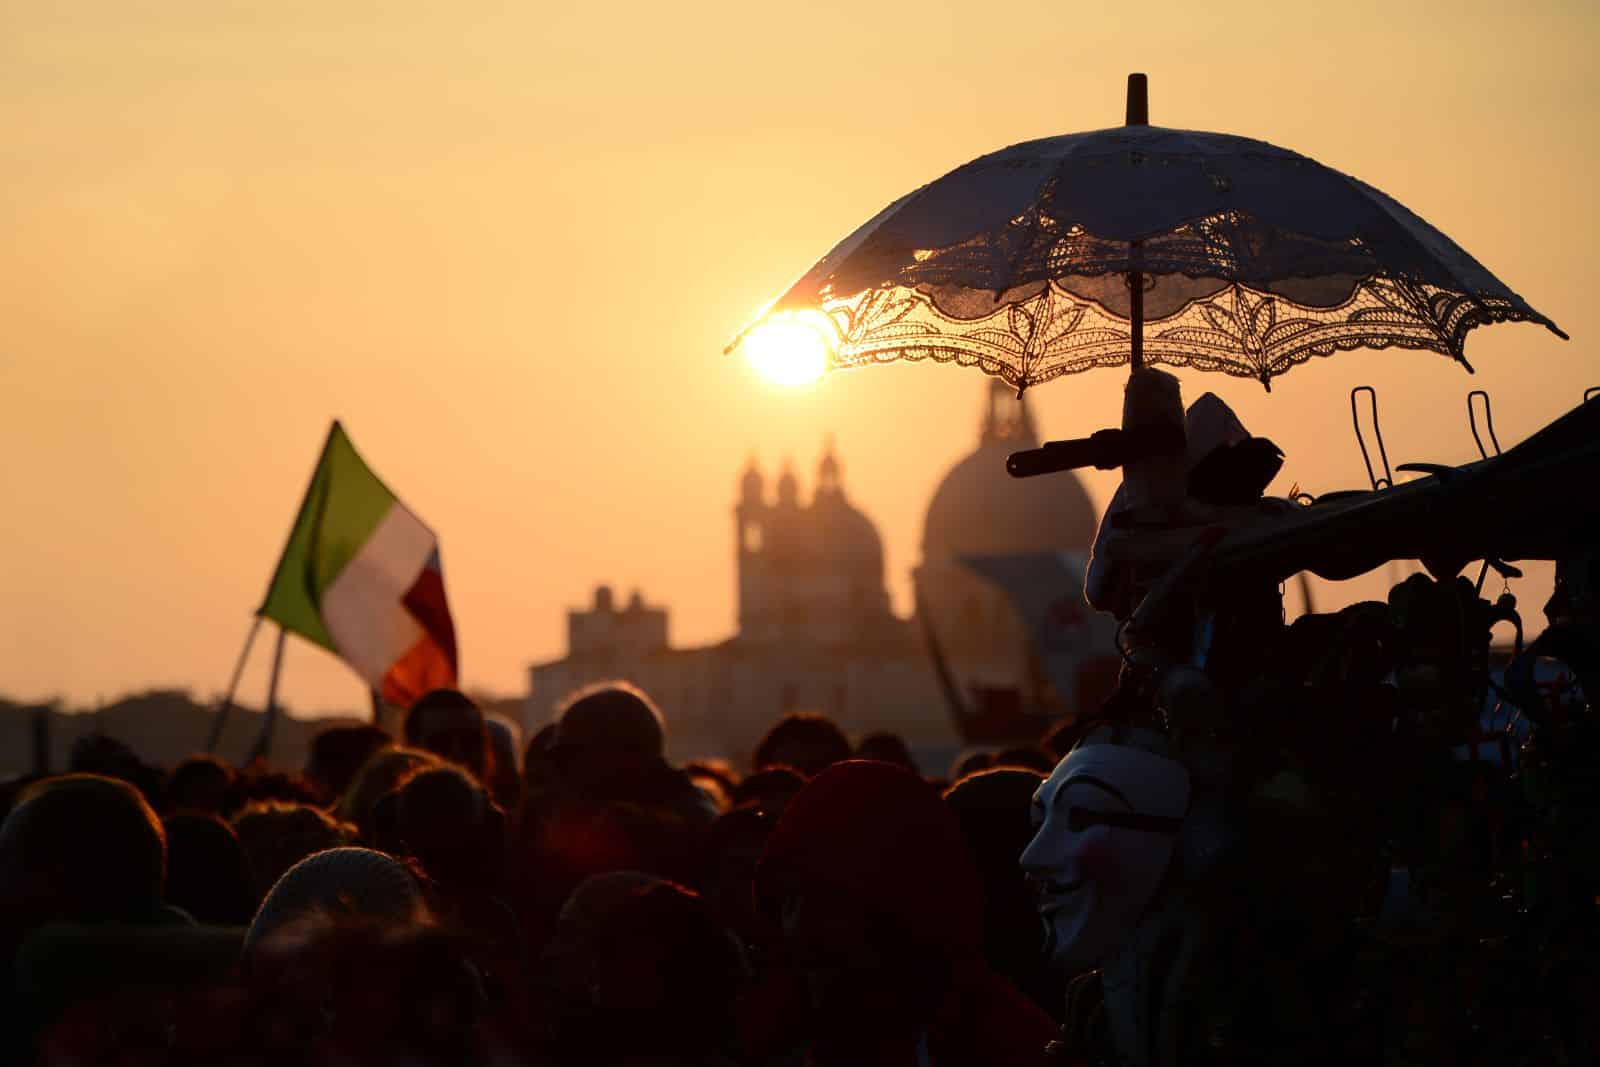 Image Credit: Shutterstock / Kate Kony <p><span>Hundreds of people gathered at the entrance point to the city, also known as the Piazzale Roma, and the city’s main train station, carrying signs and banners with words of protest. </span></p>